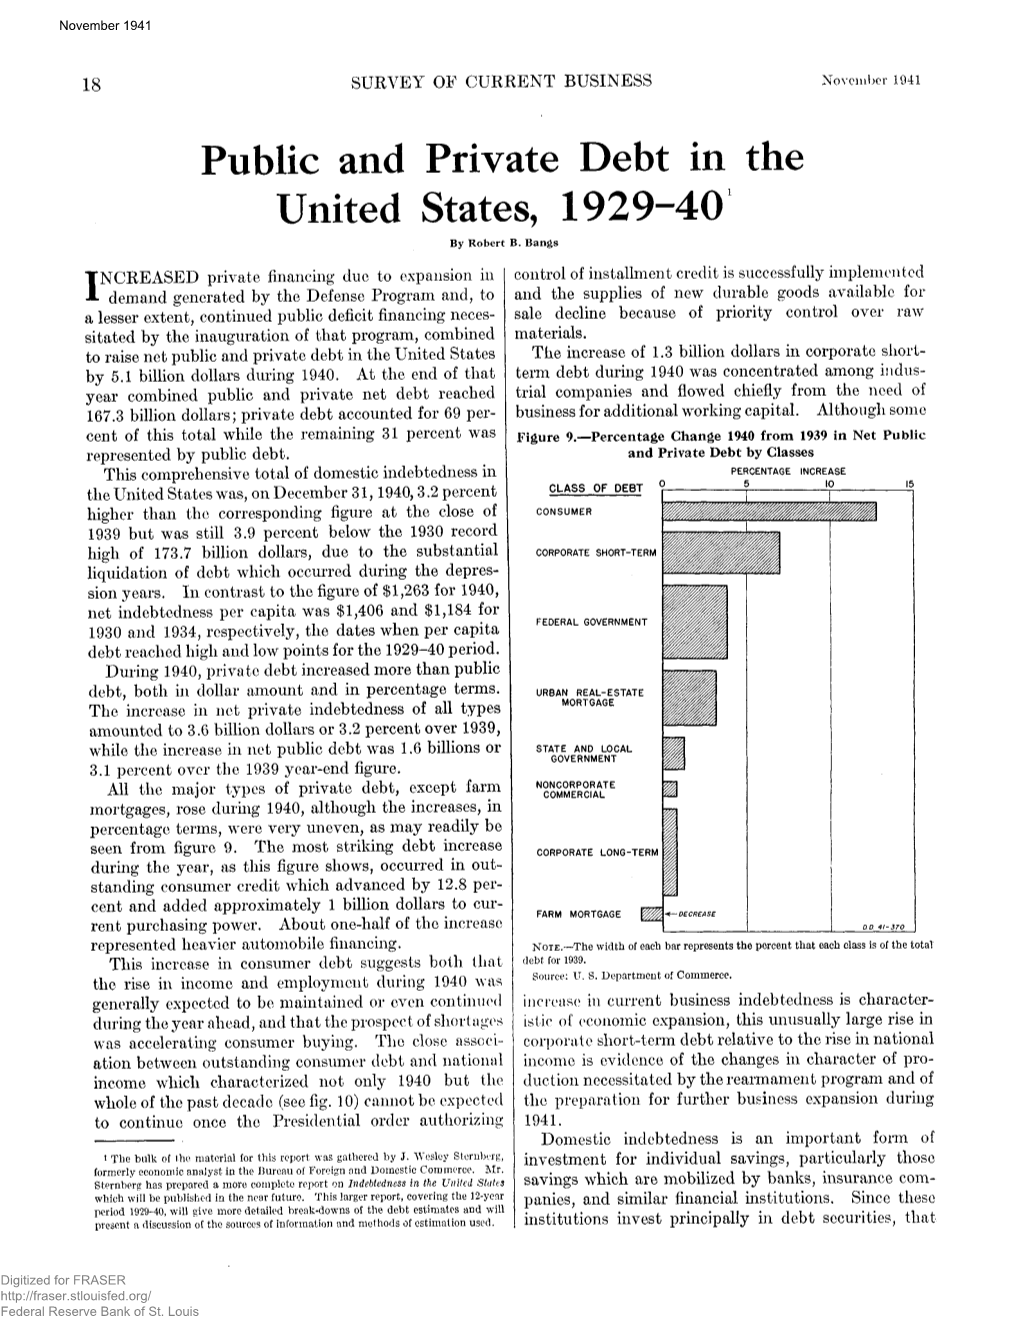 Public and Private Debt in the United States, 1929-40 by Robert B